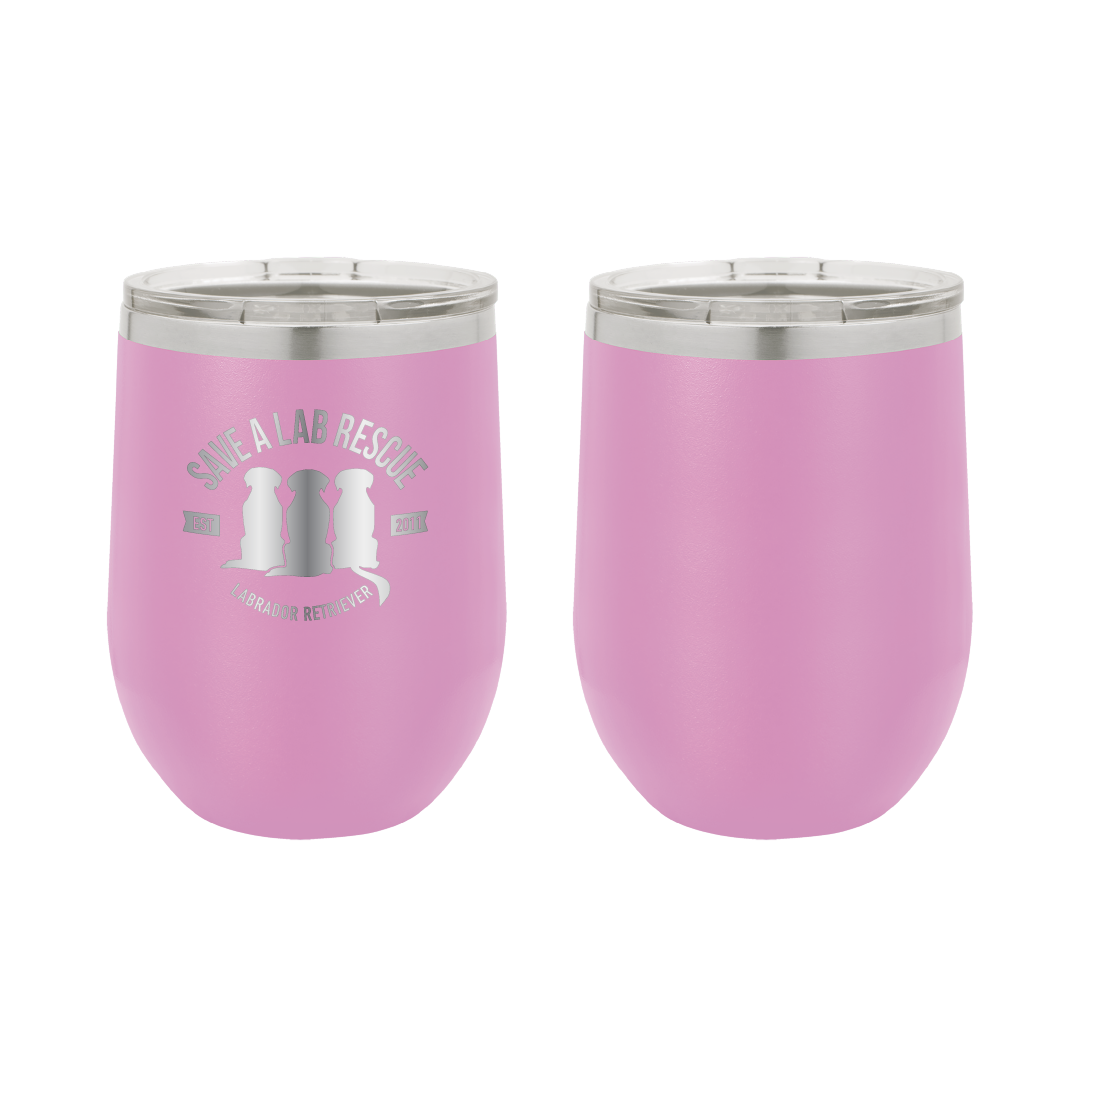 12 oz Wine Tumbler, laser engraved gift for mom's, dads and dog lovers. Light purple tumbler with the Save A Lab logo.